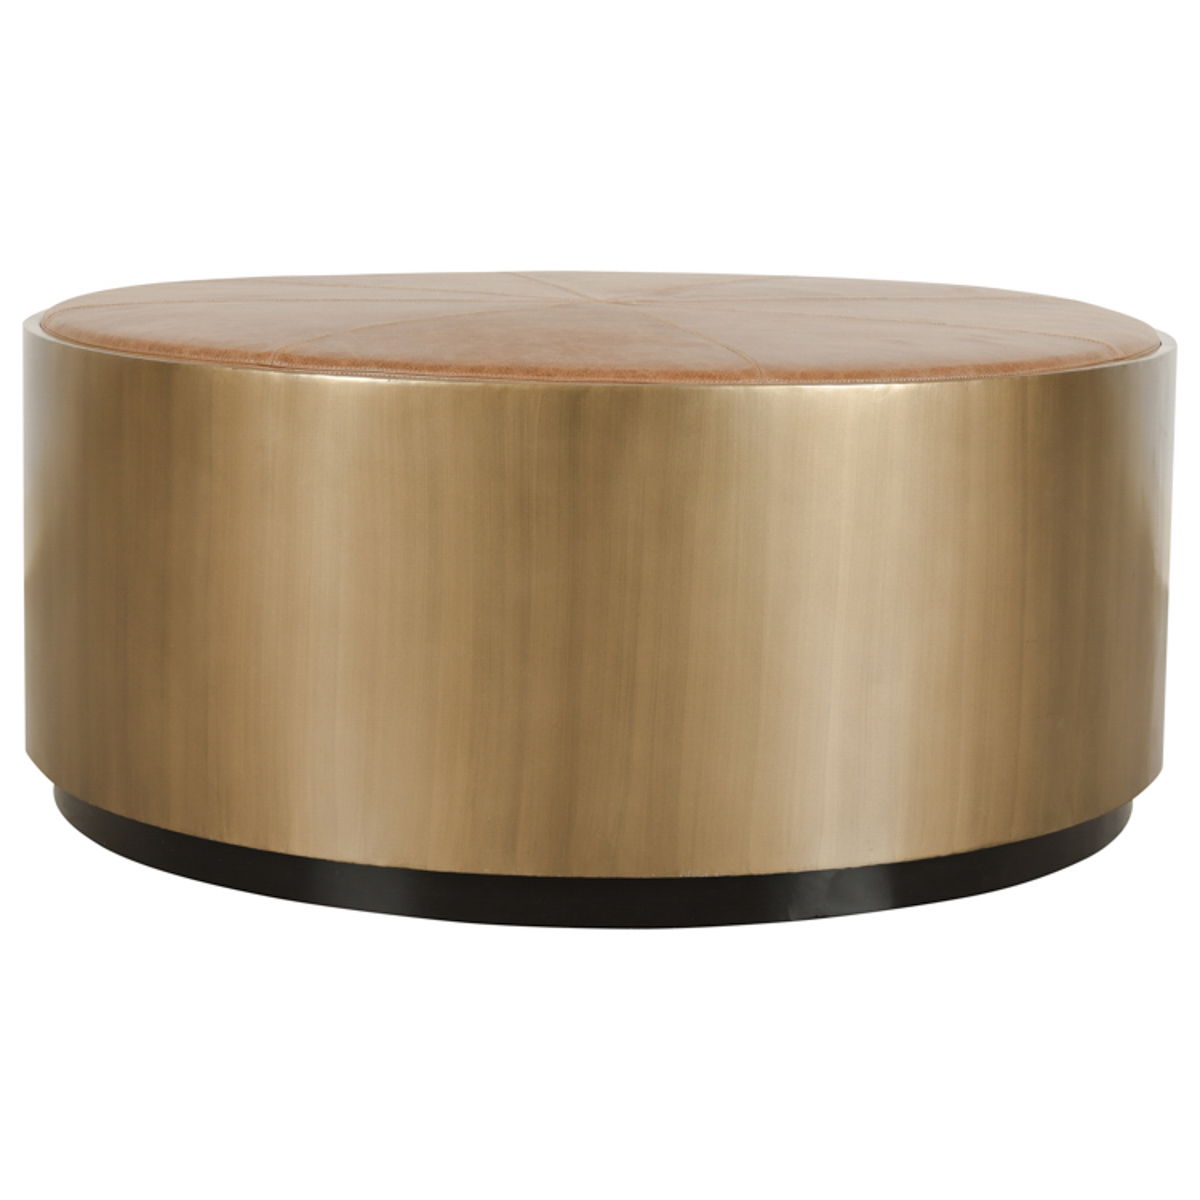 Evan - Round Coffee Table With Casters - Chestnut/Brass